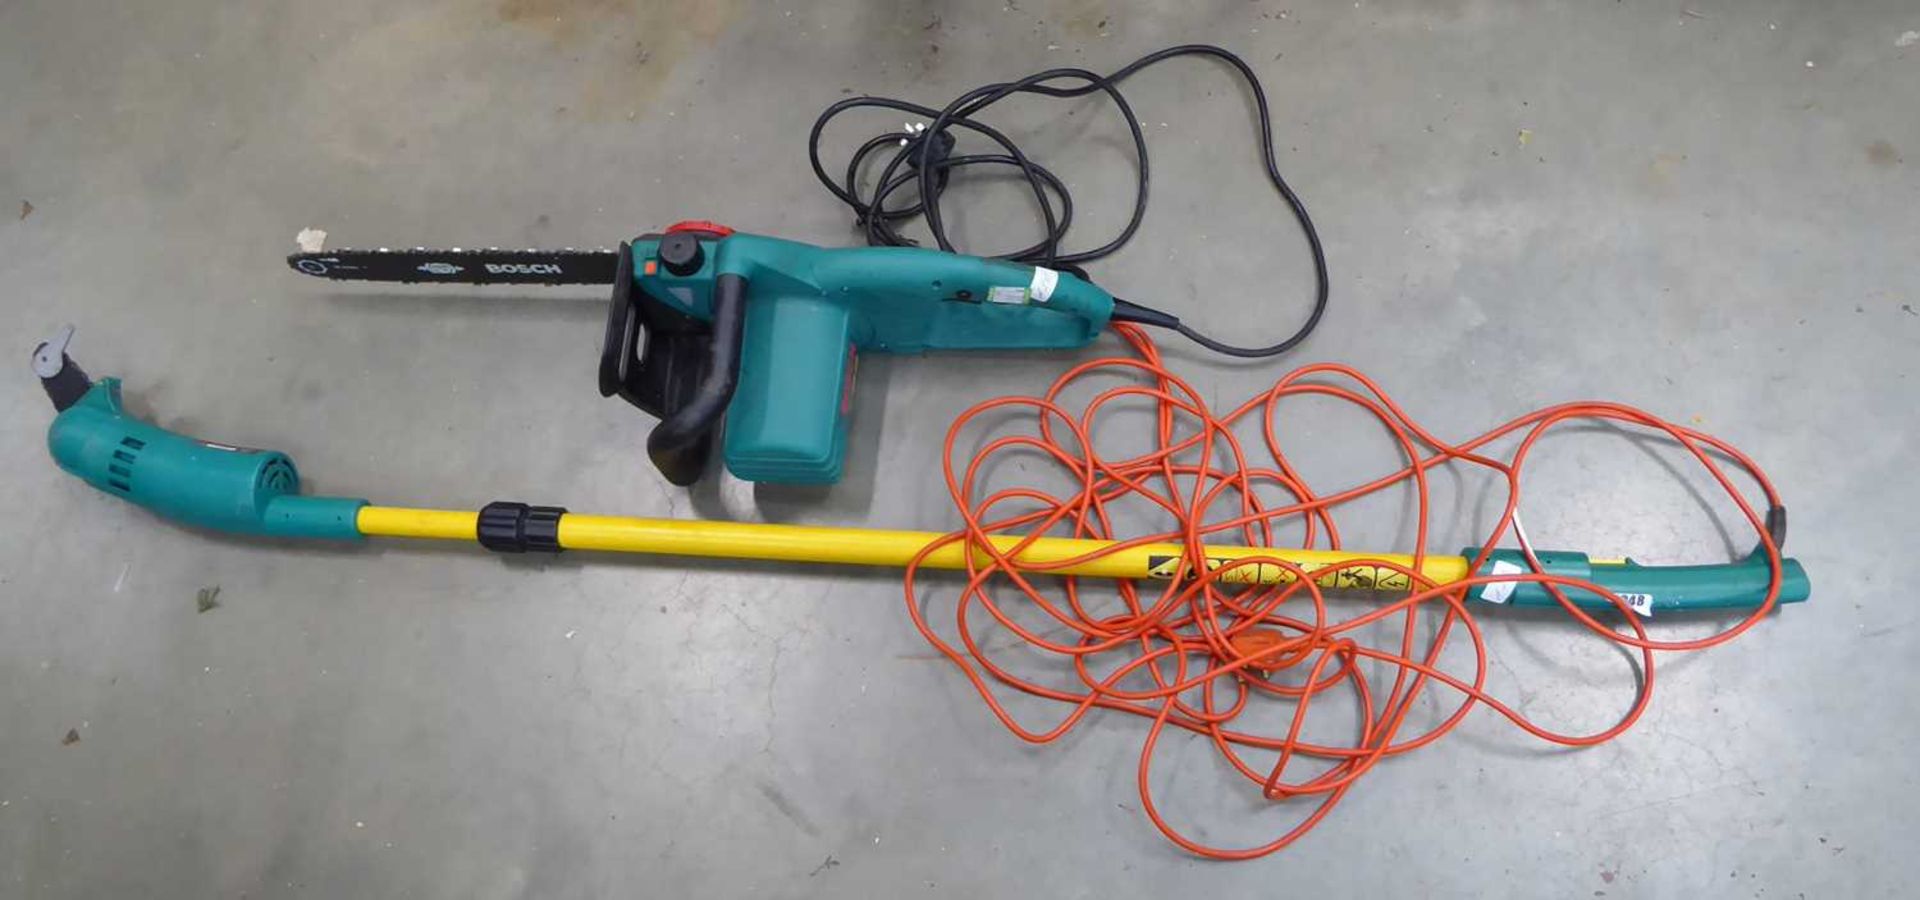 Bosch electric chainsaw and polecutter